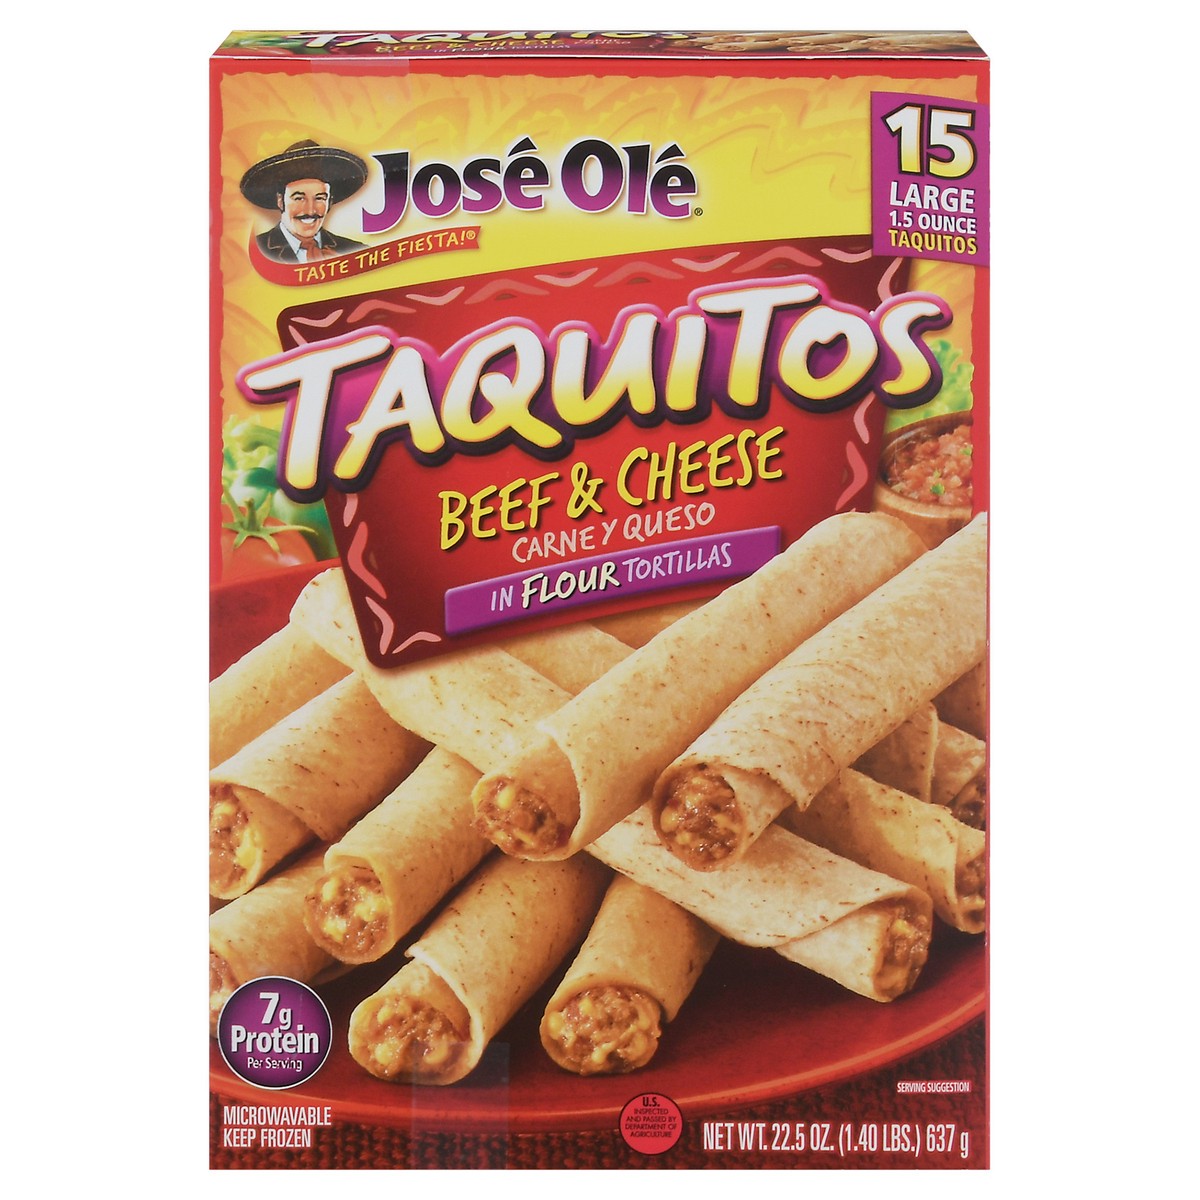 slide 1 of 9, José Olé Beef & Cheese Taquitos 15 - 1.5 oz Taquitos, 15 ct